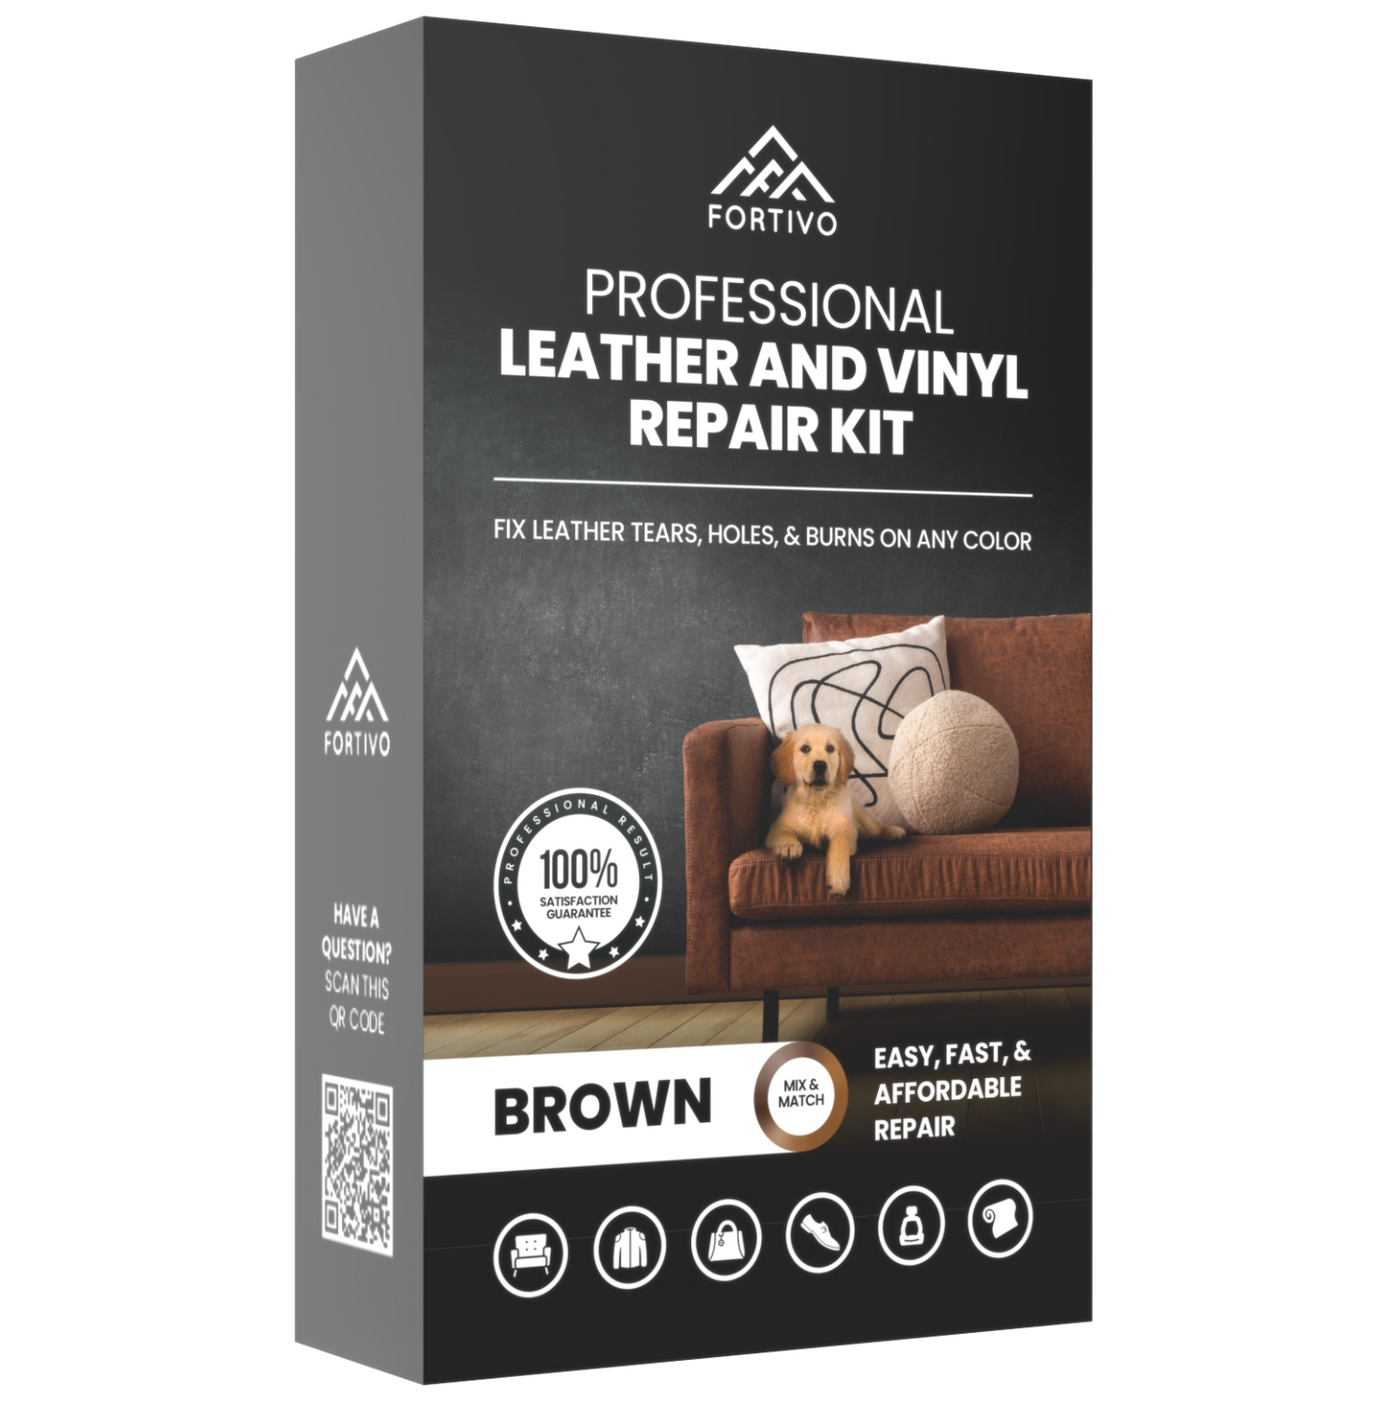 20ml Leather Repair Kit For Furniture, Vinyl Furniture Repair Kit For Car  Seats, Jackets, Purses, Leather Shoes, Boats & More